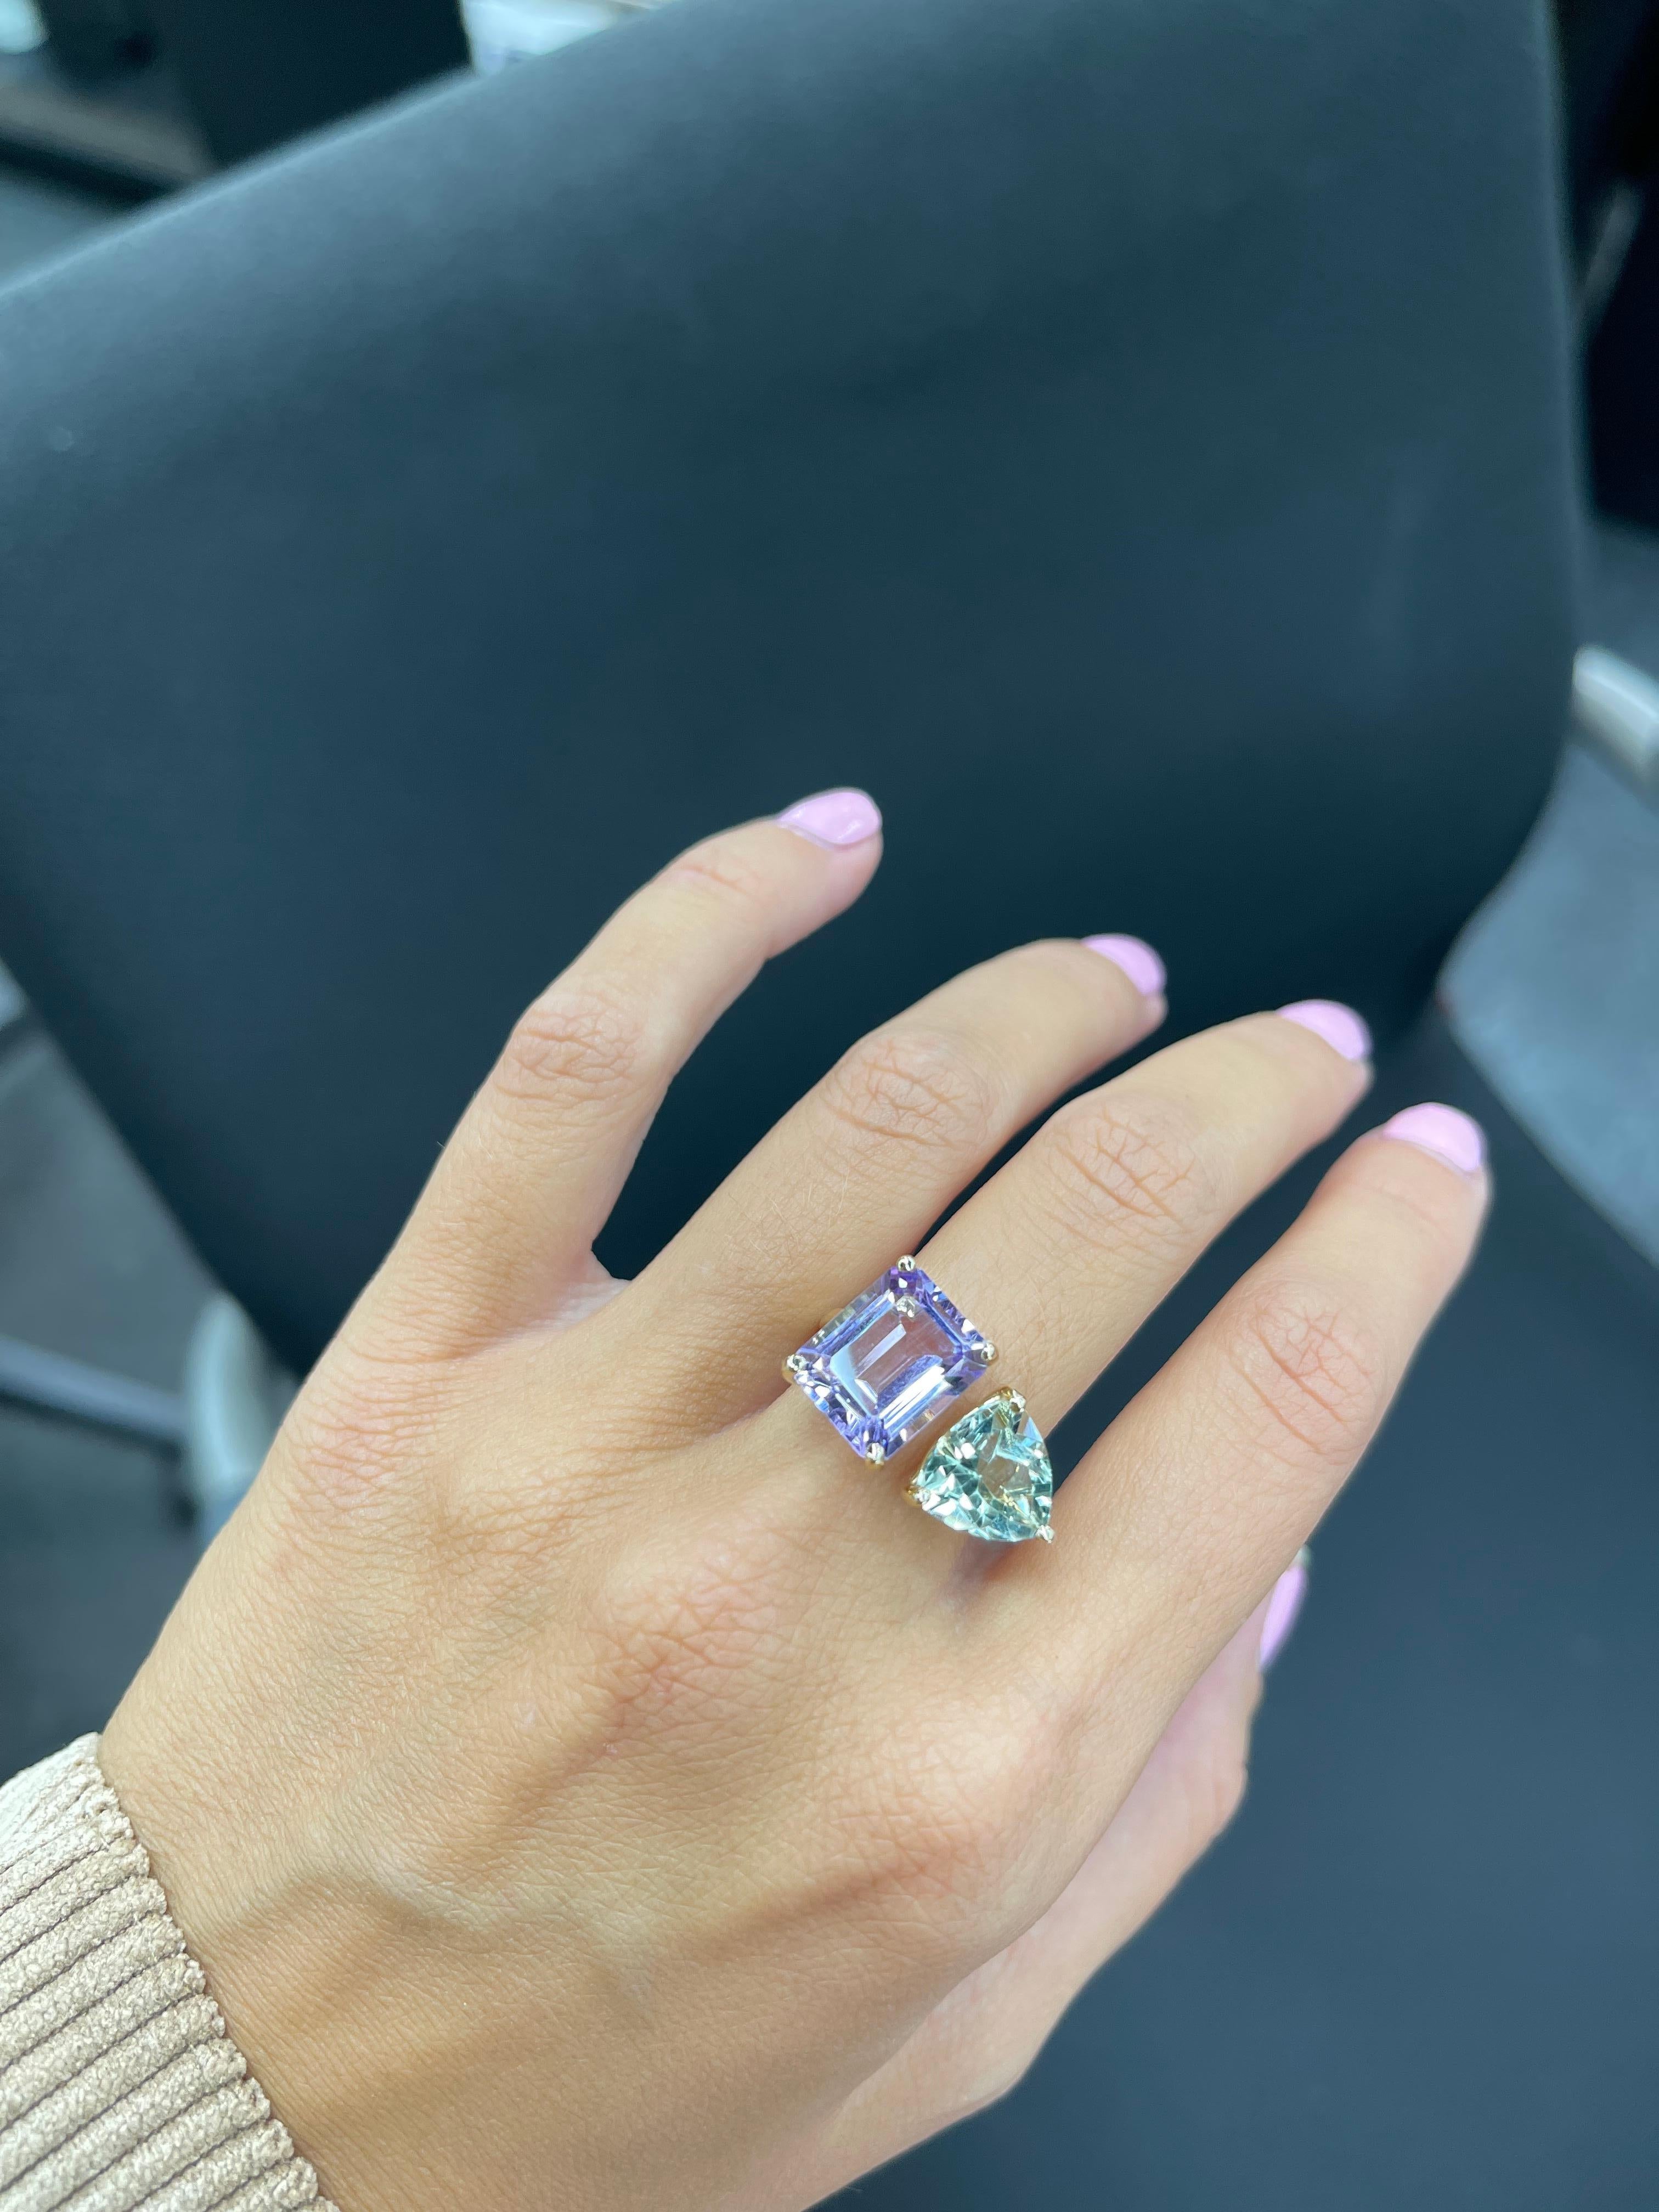 one of a kind ring, custom made by our jewelers 
Emerald cut Amethyst 5.32 cts
trillion Tourmaline 3.10 cts.